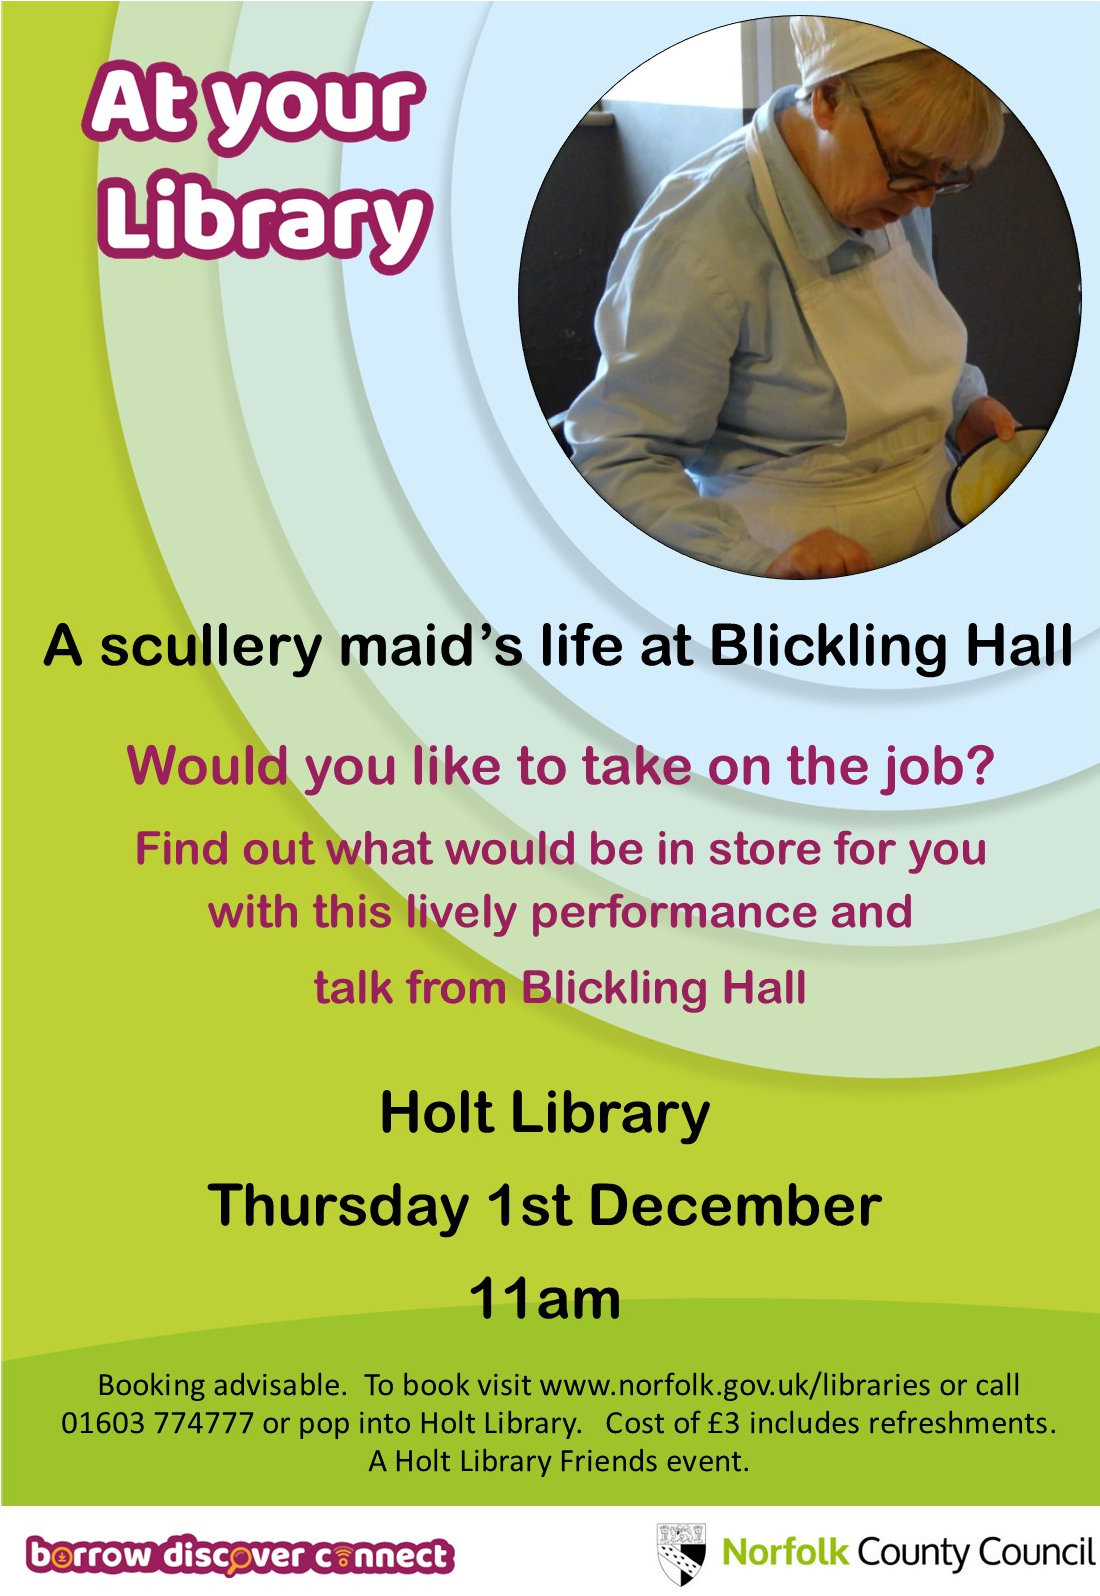 Life as a Scullery Maid at Blickling, Holt Library, Church Street, Norfolk, Holt, NR25 6BB | A lively peformance and talk from Blickling Hall | Performace, Blickling Hall, talk, refreshments